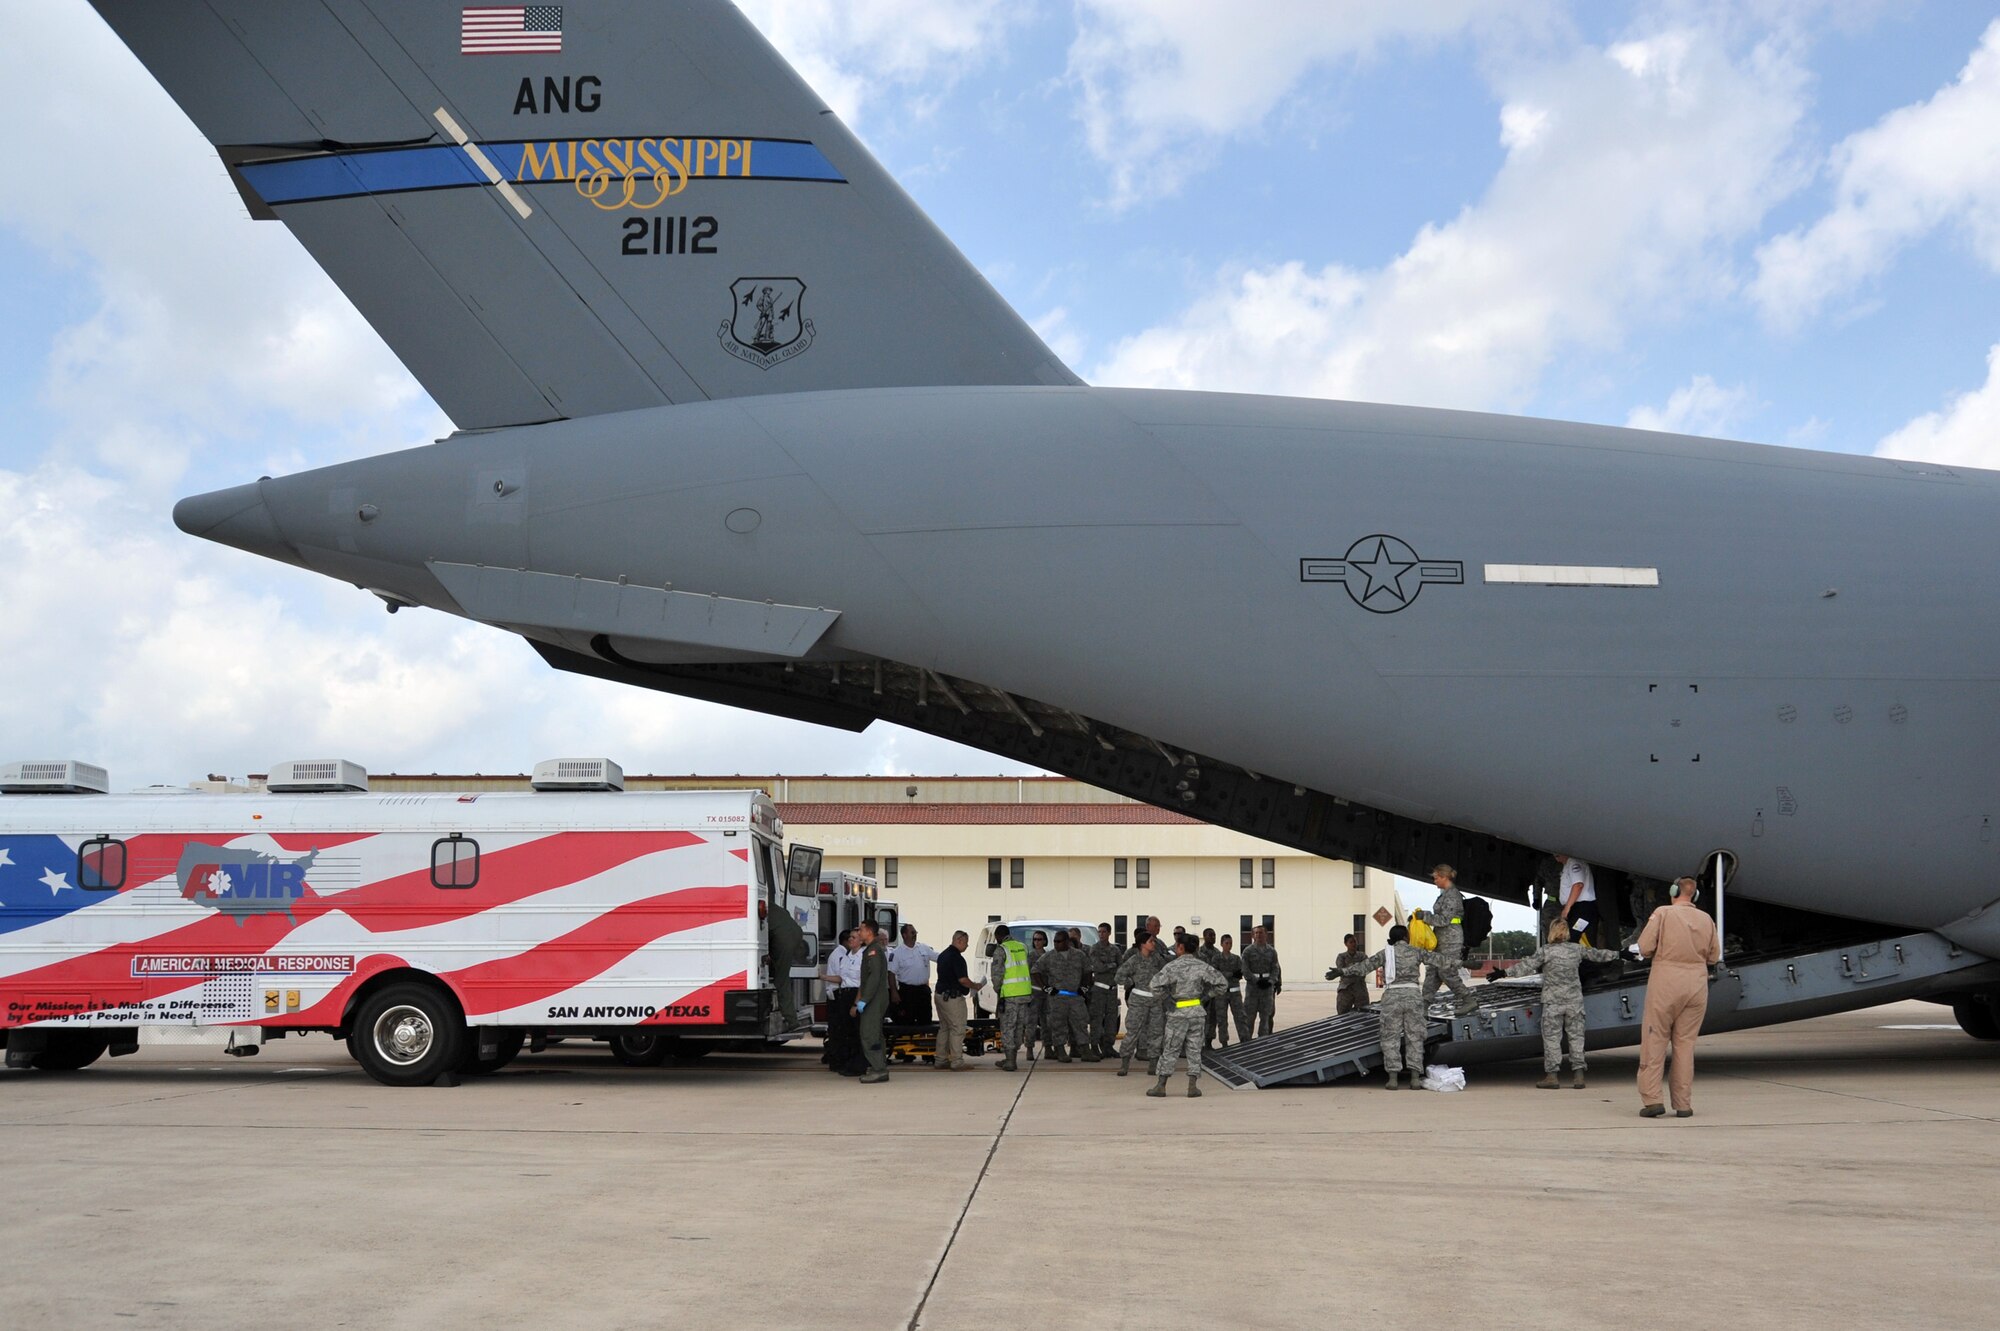 Service members of the 59th Contingency Aeromedical Staging Facility and Air Force personnel assist wounded warriors off a C-17 Globemaster III that arrived on Joint Base San Antonio-Lackland flightline on July 10, 2012. (U.S. Air Force photo/Desiree N. Palacios)